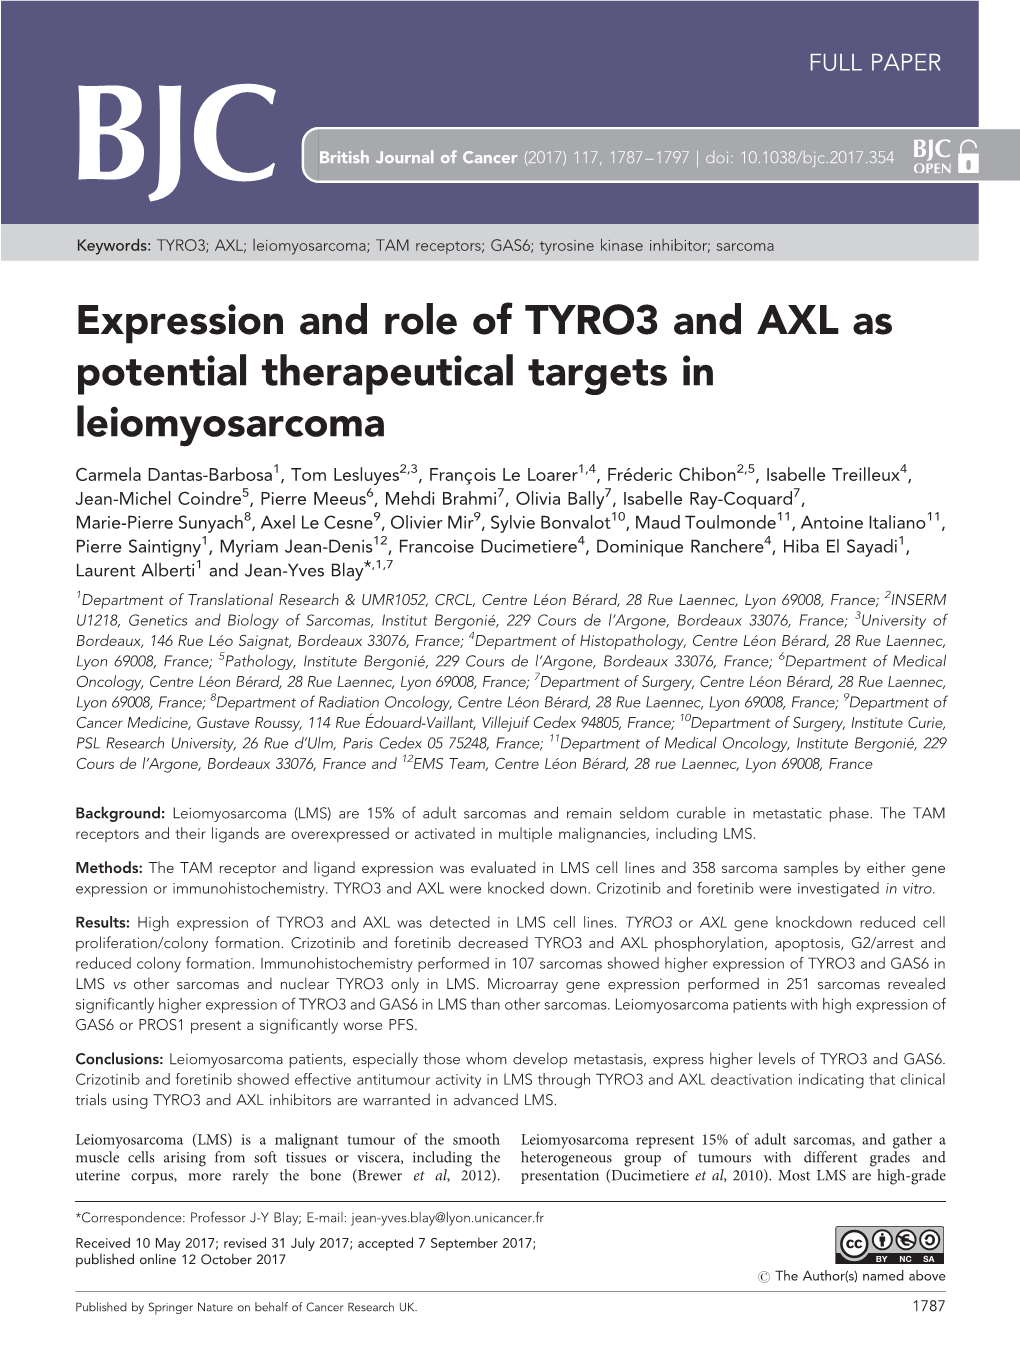 Expression and Role of TYRO3 and AXL As Potential Therapeutical Targets in Leiomyosarcoma